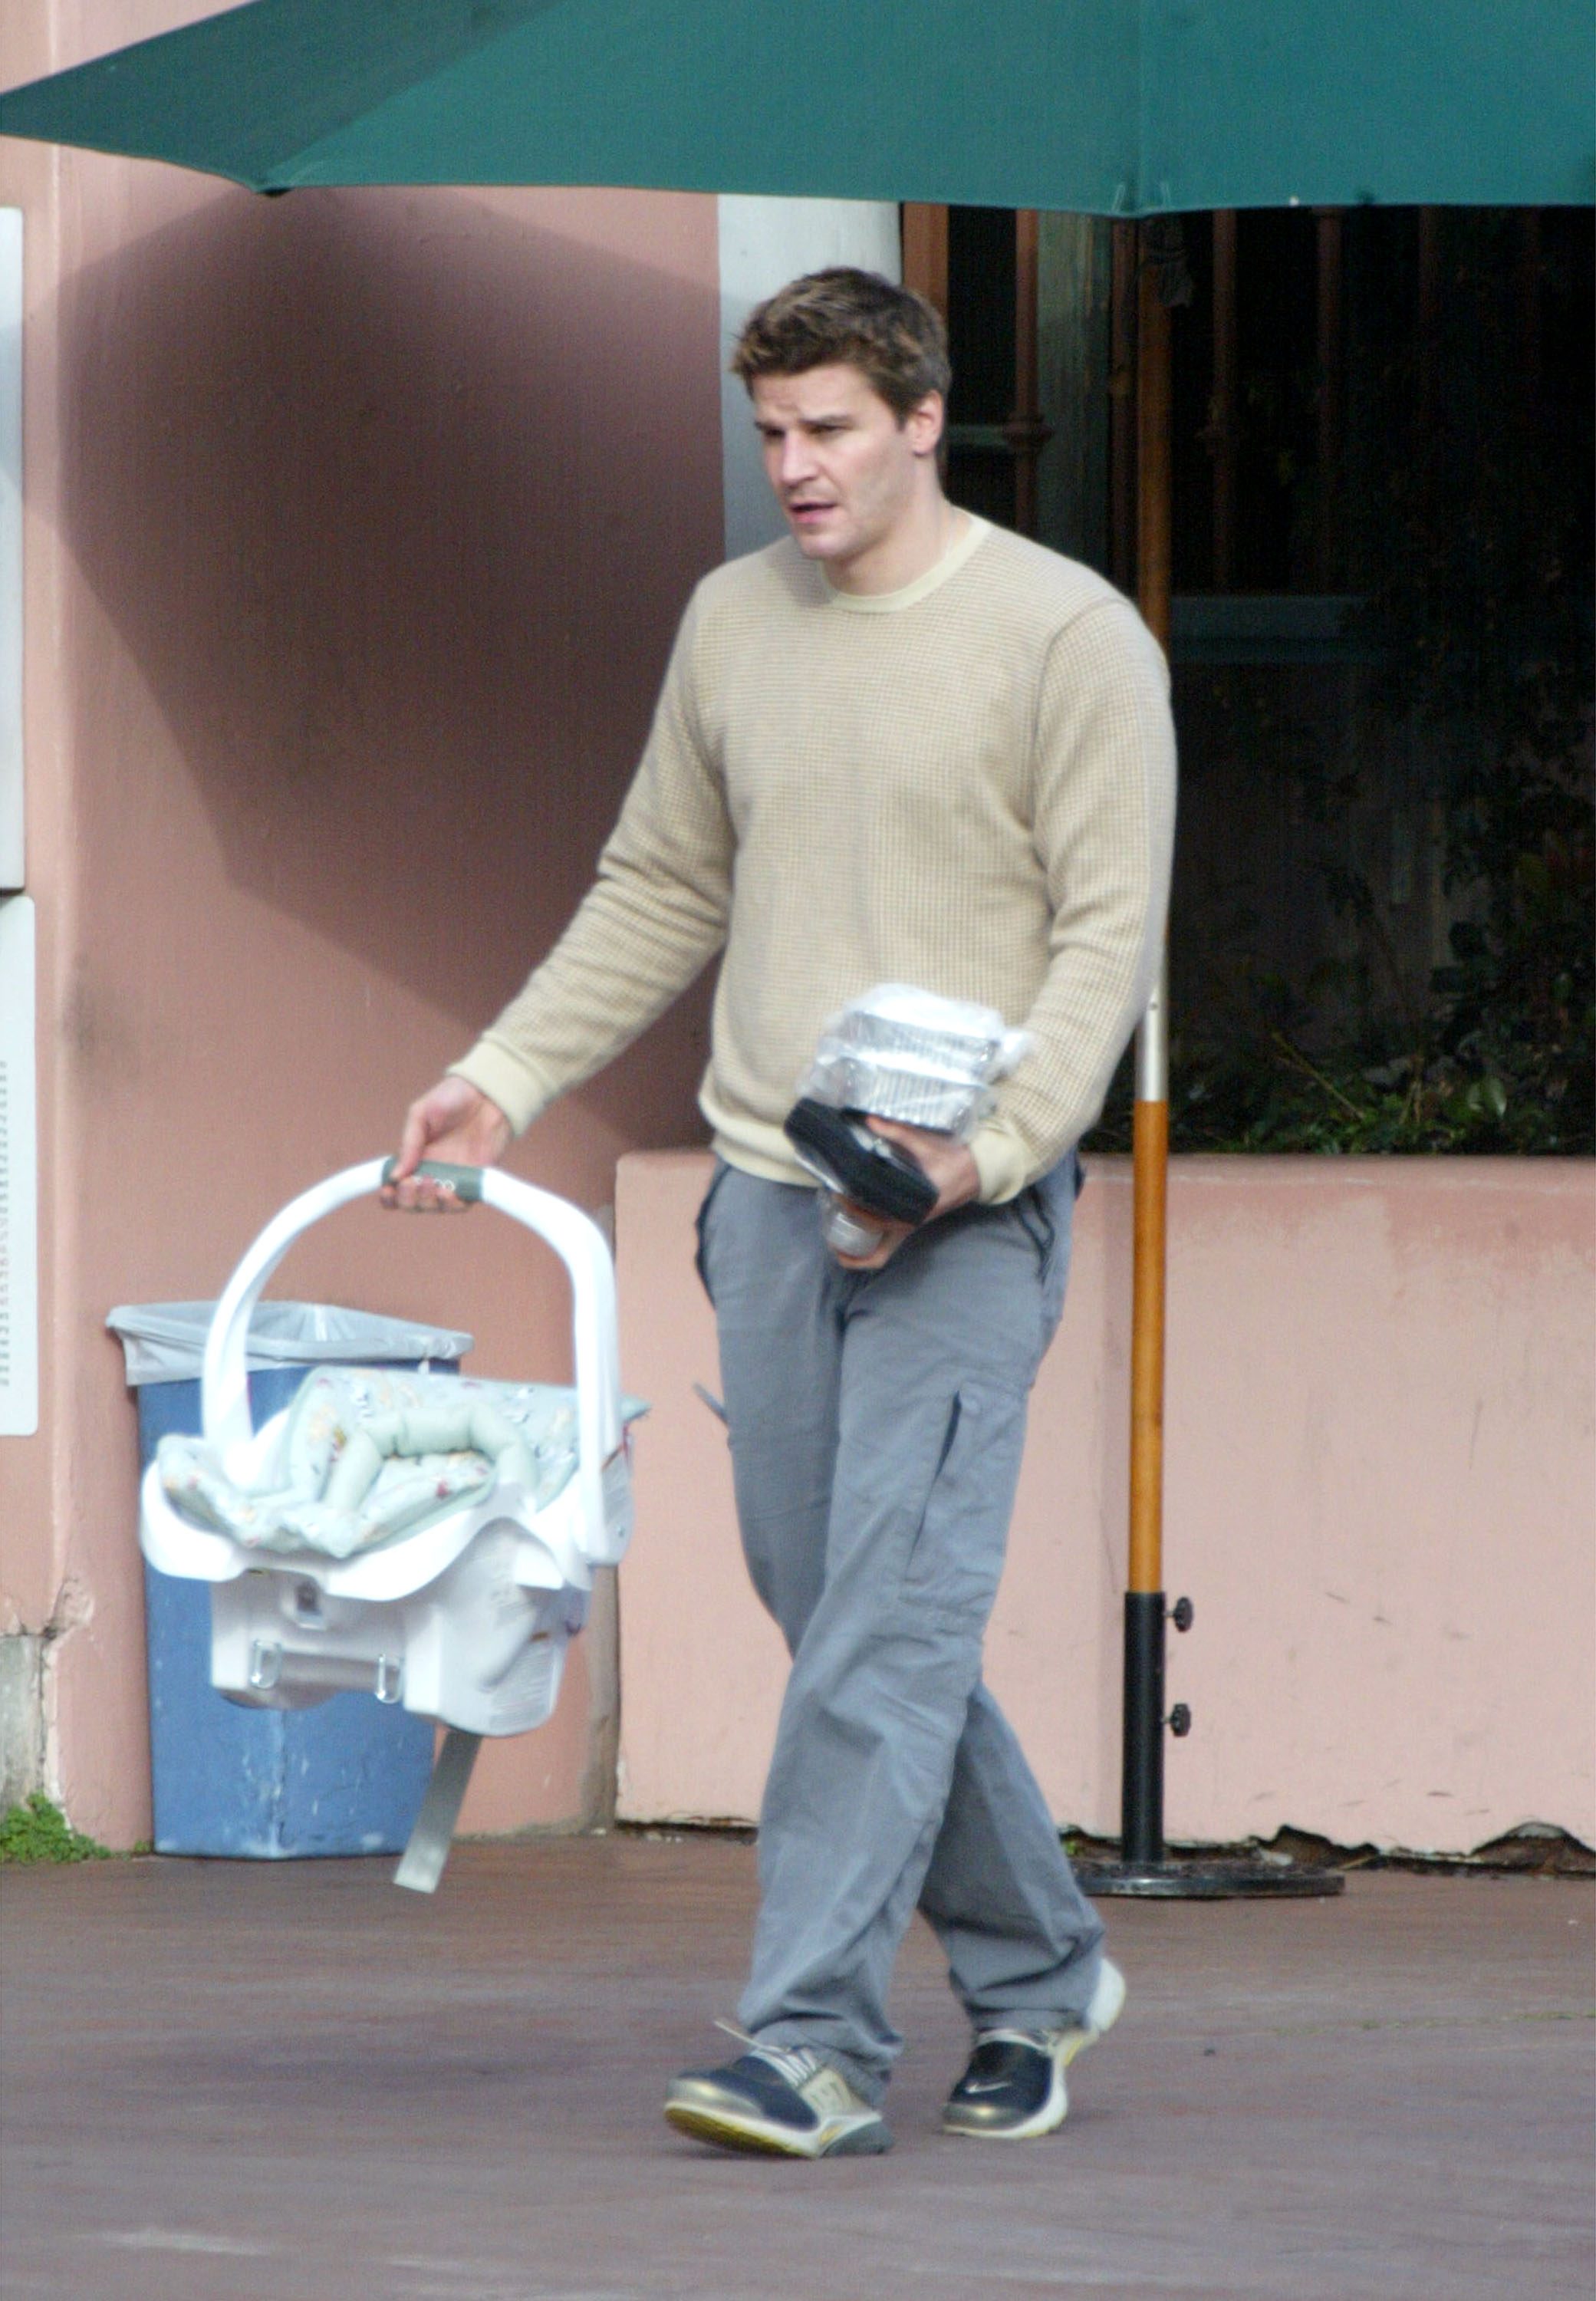 Actor David Boreanaz leaves The Ivy On The Shore restaurant after dining with his wife, actress Jaime Bergman and their newborn baby May 7, 2002, in Santa Monica, California | Source: Getty Images